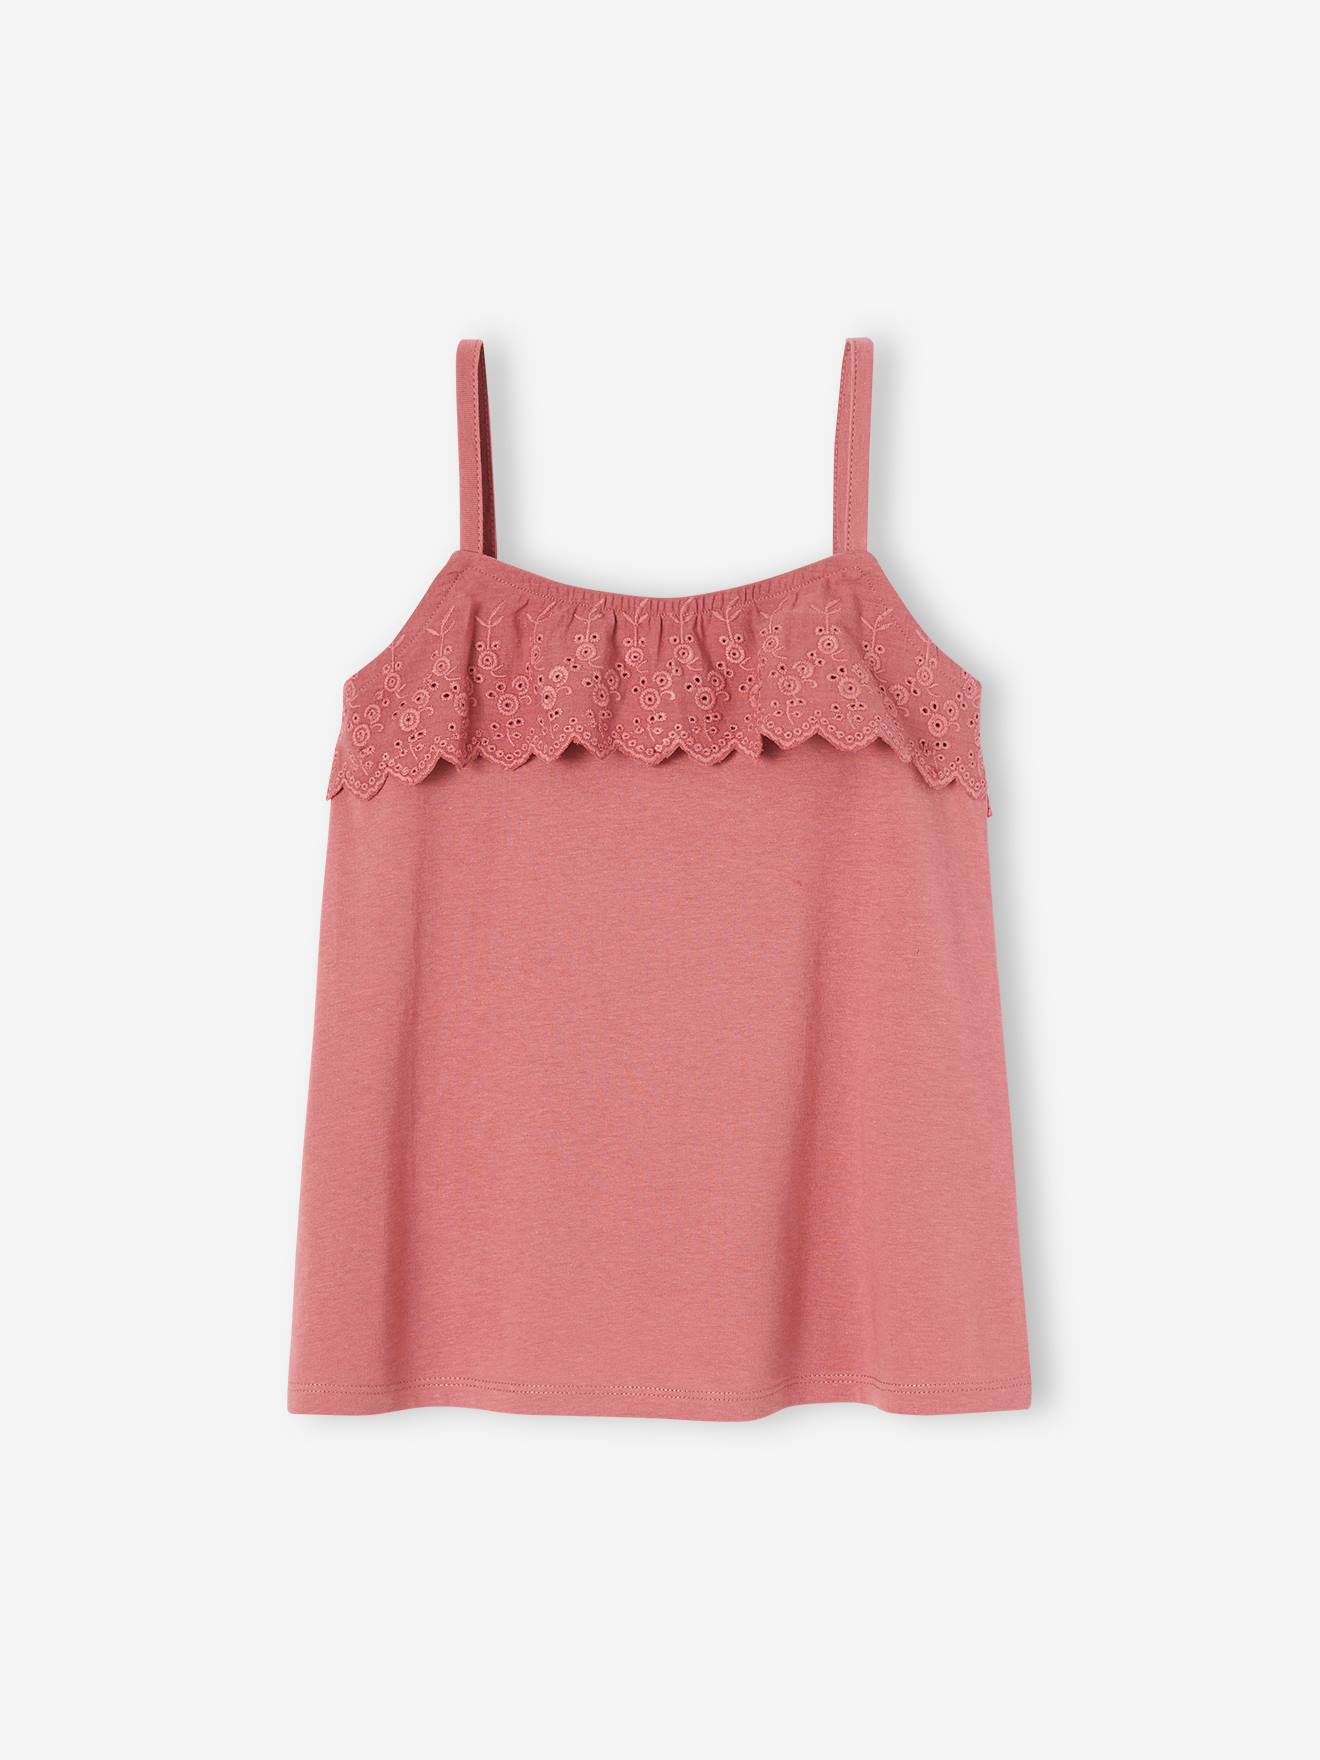 Sleeveless Top with Ruffles in Broderie Anglaise for Girls old rose